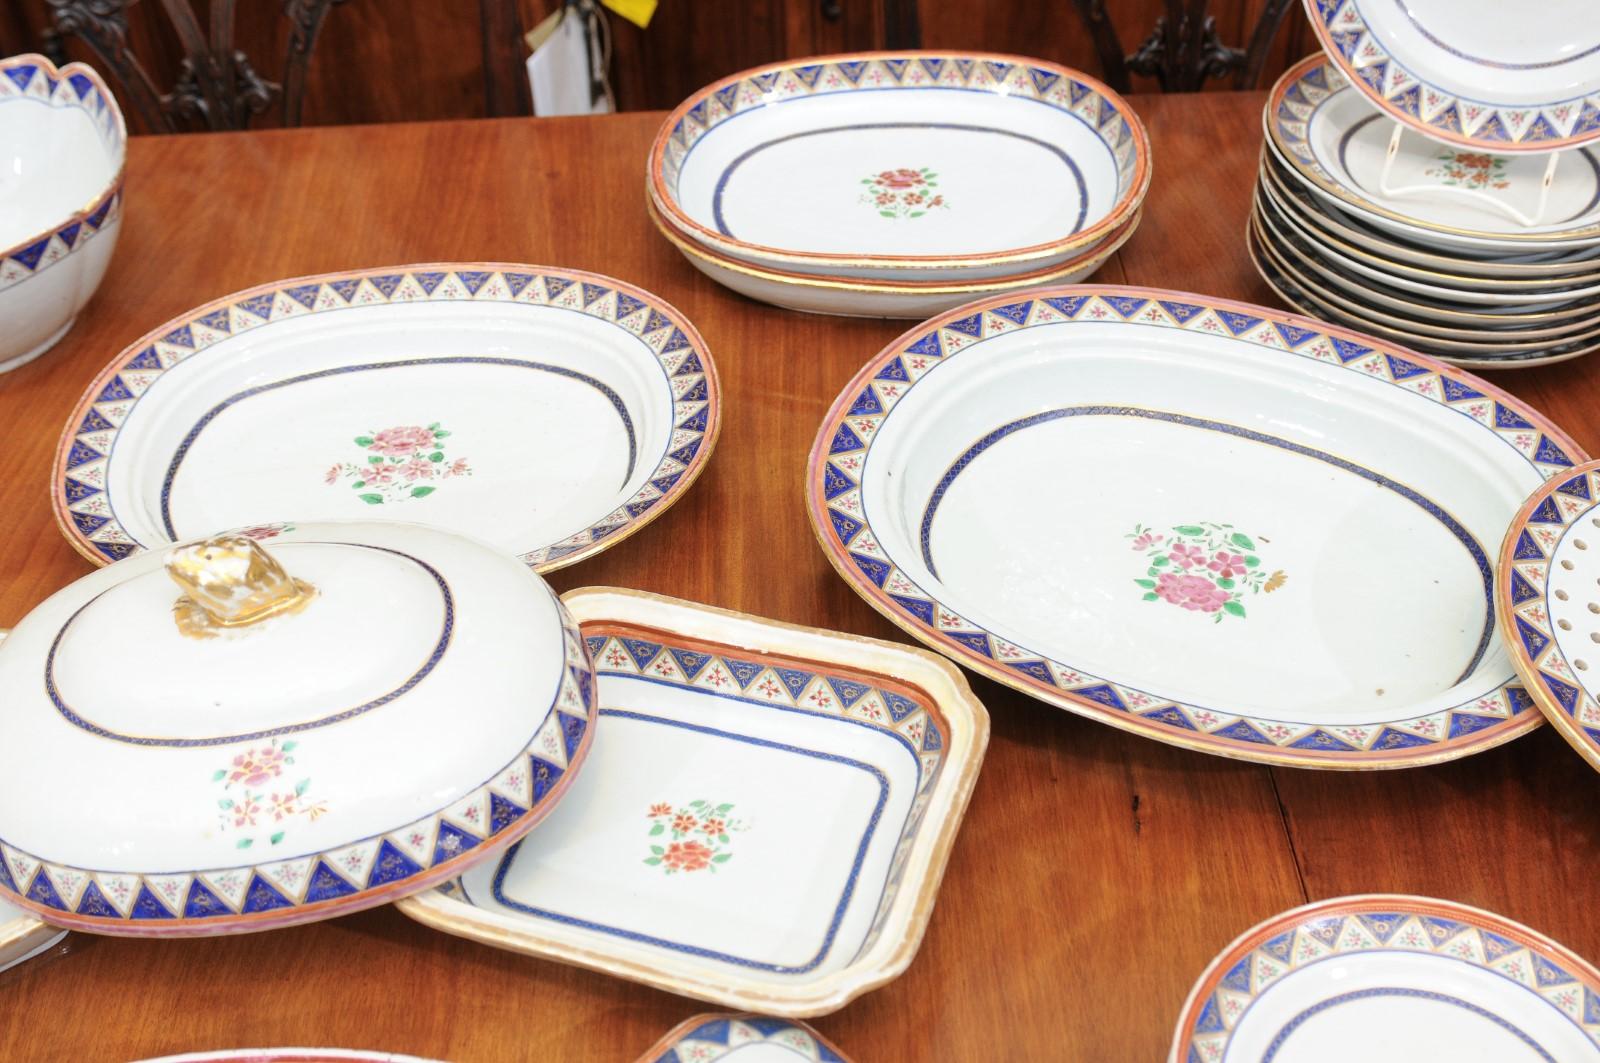 19th C. Chinese Export Famille Rose Porcelain Part-Dinner Service, 45 Piece Set For Sale 3